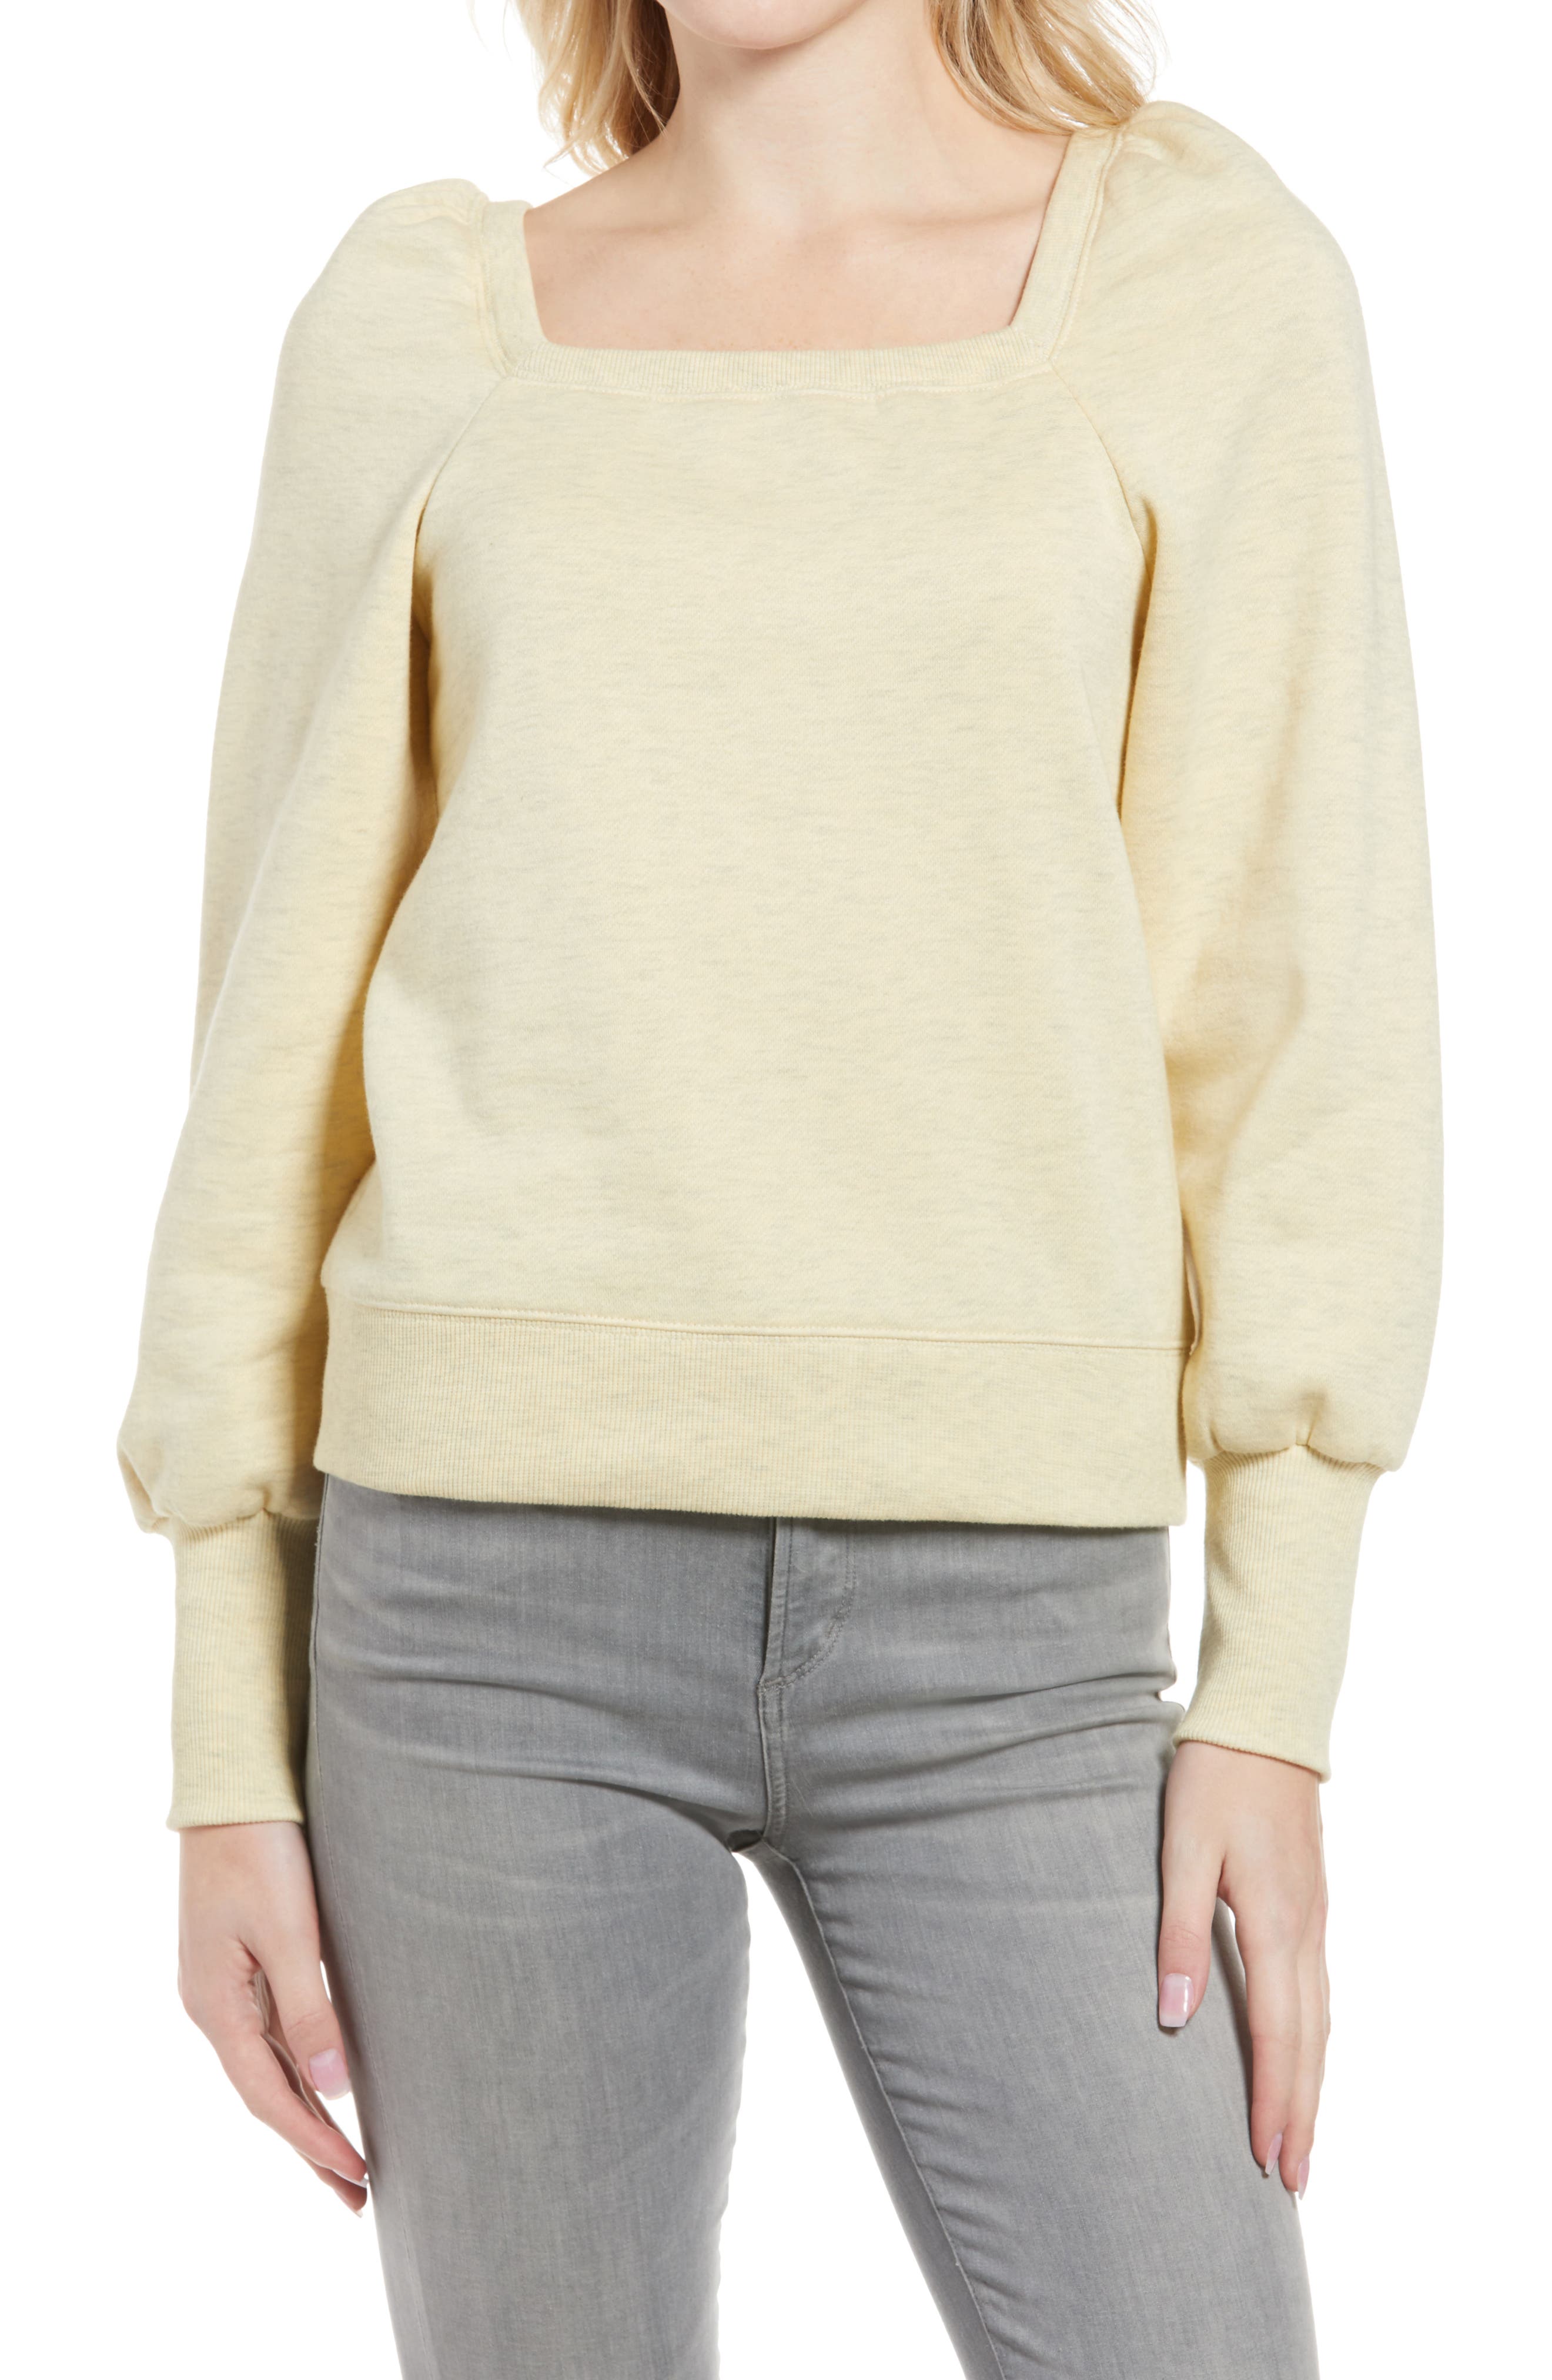 Rebecca Minkoff Ariel Square Neck Puff Sleeve Sweatshirt in Oat Melange at Nordstrom, Size Small